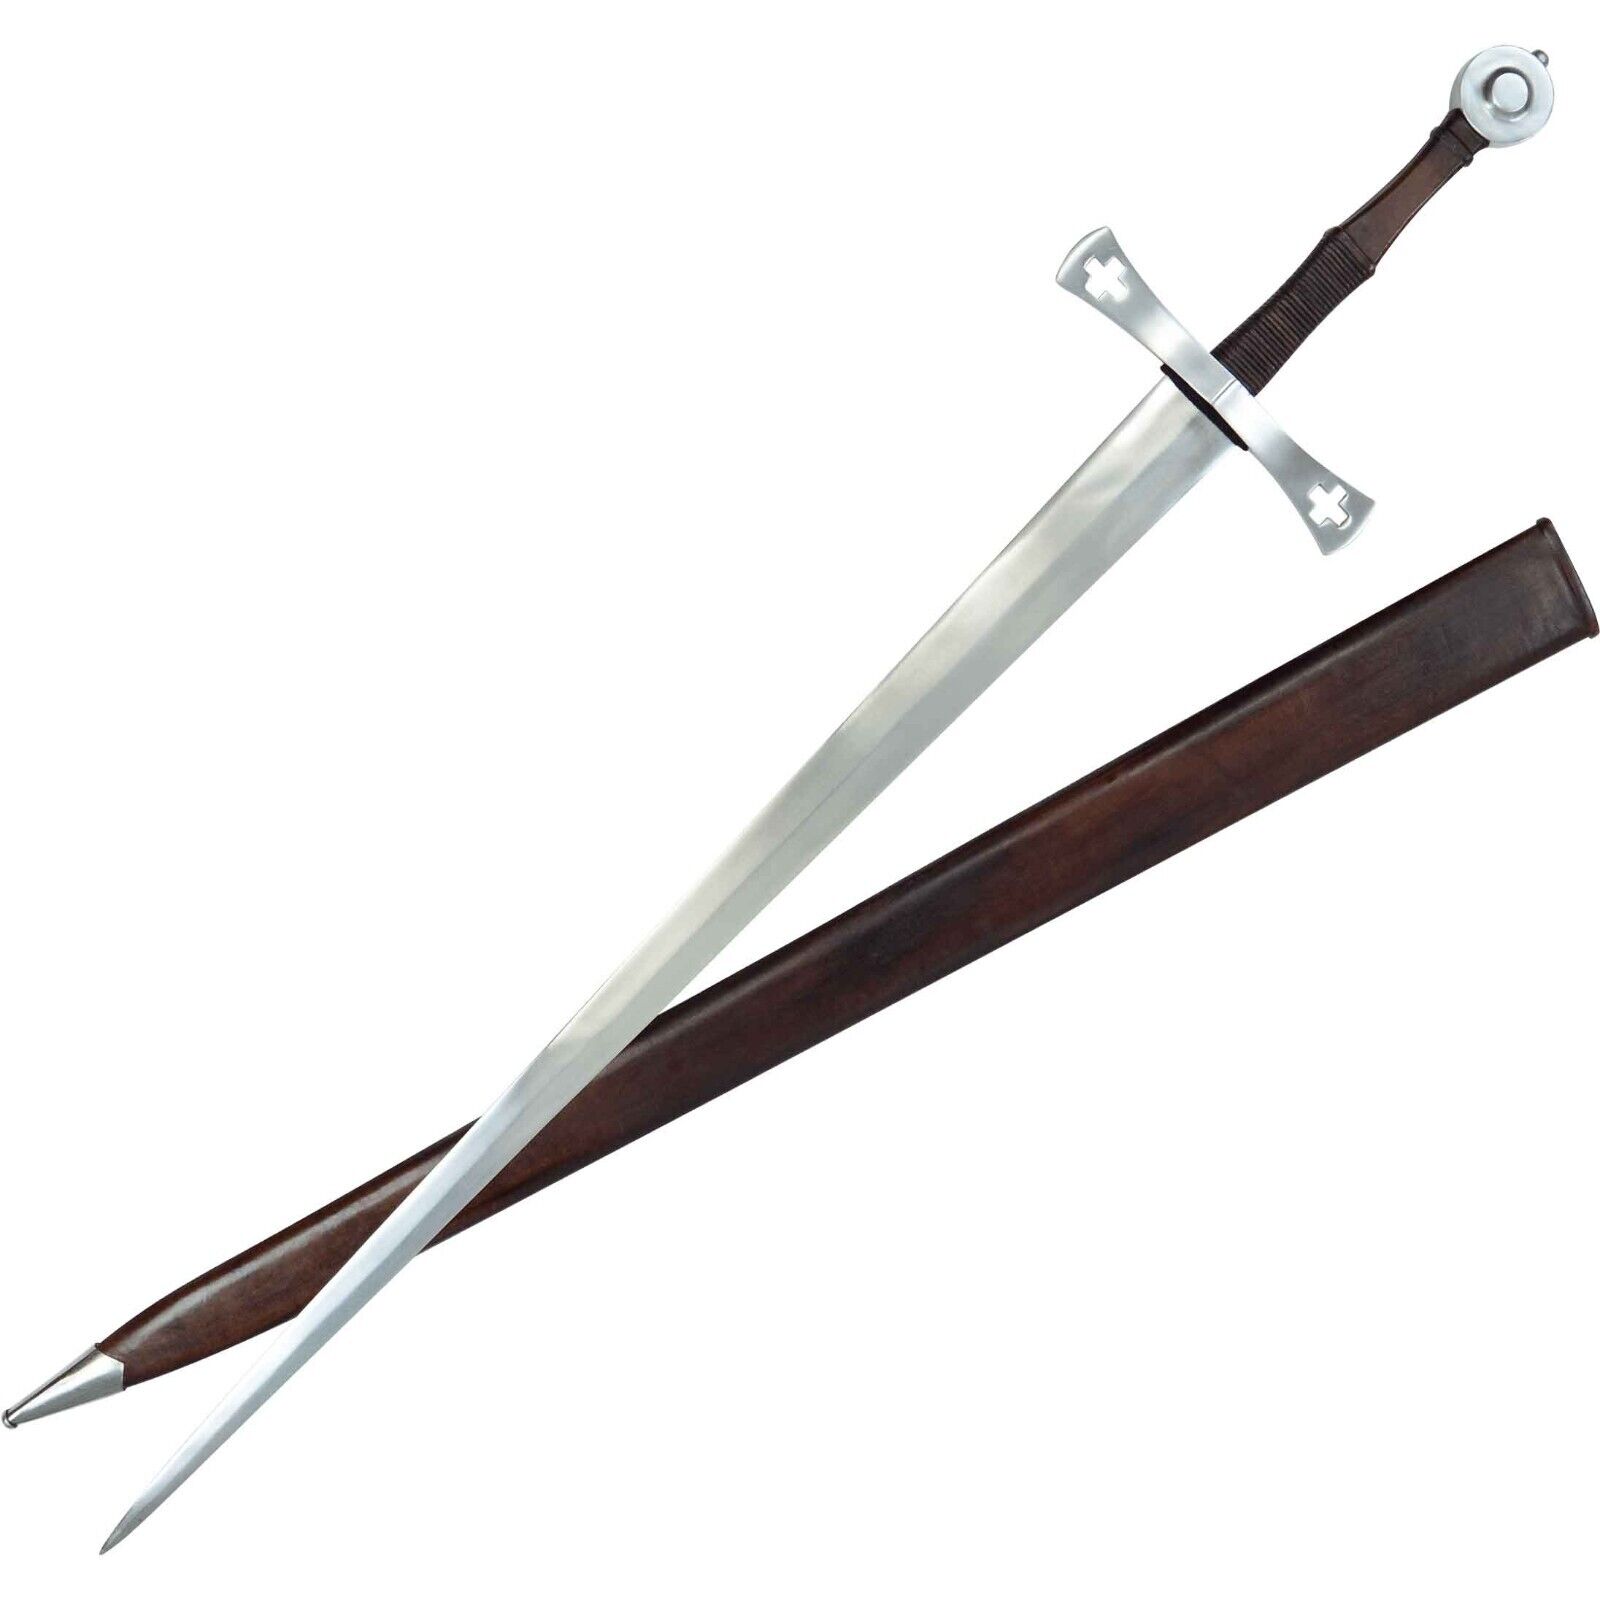 Two Handed Medieval Long Sword / Battle Ready Sword with wooden Scabbard